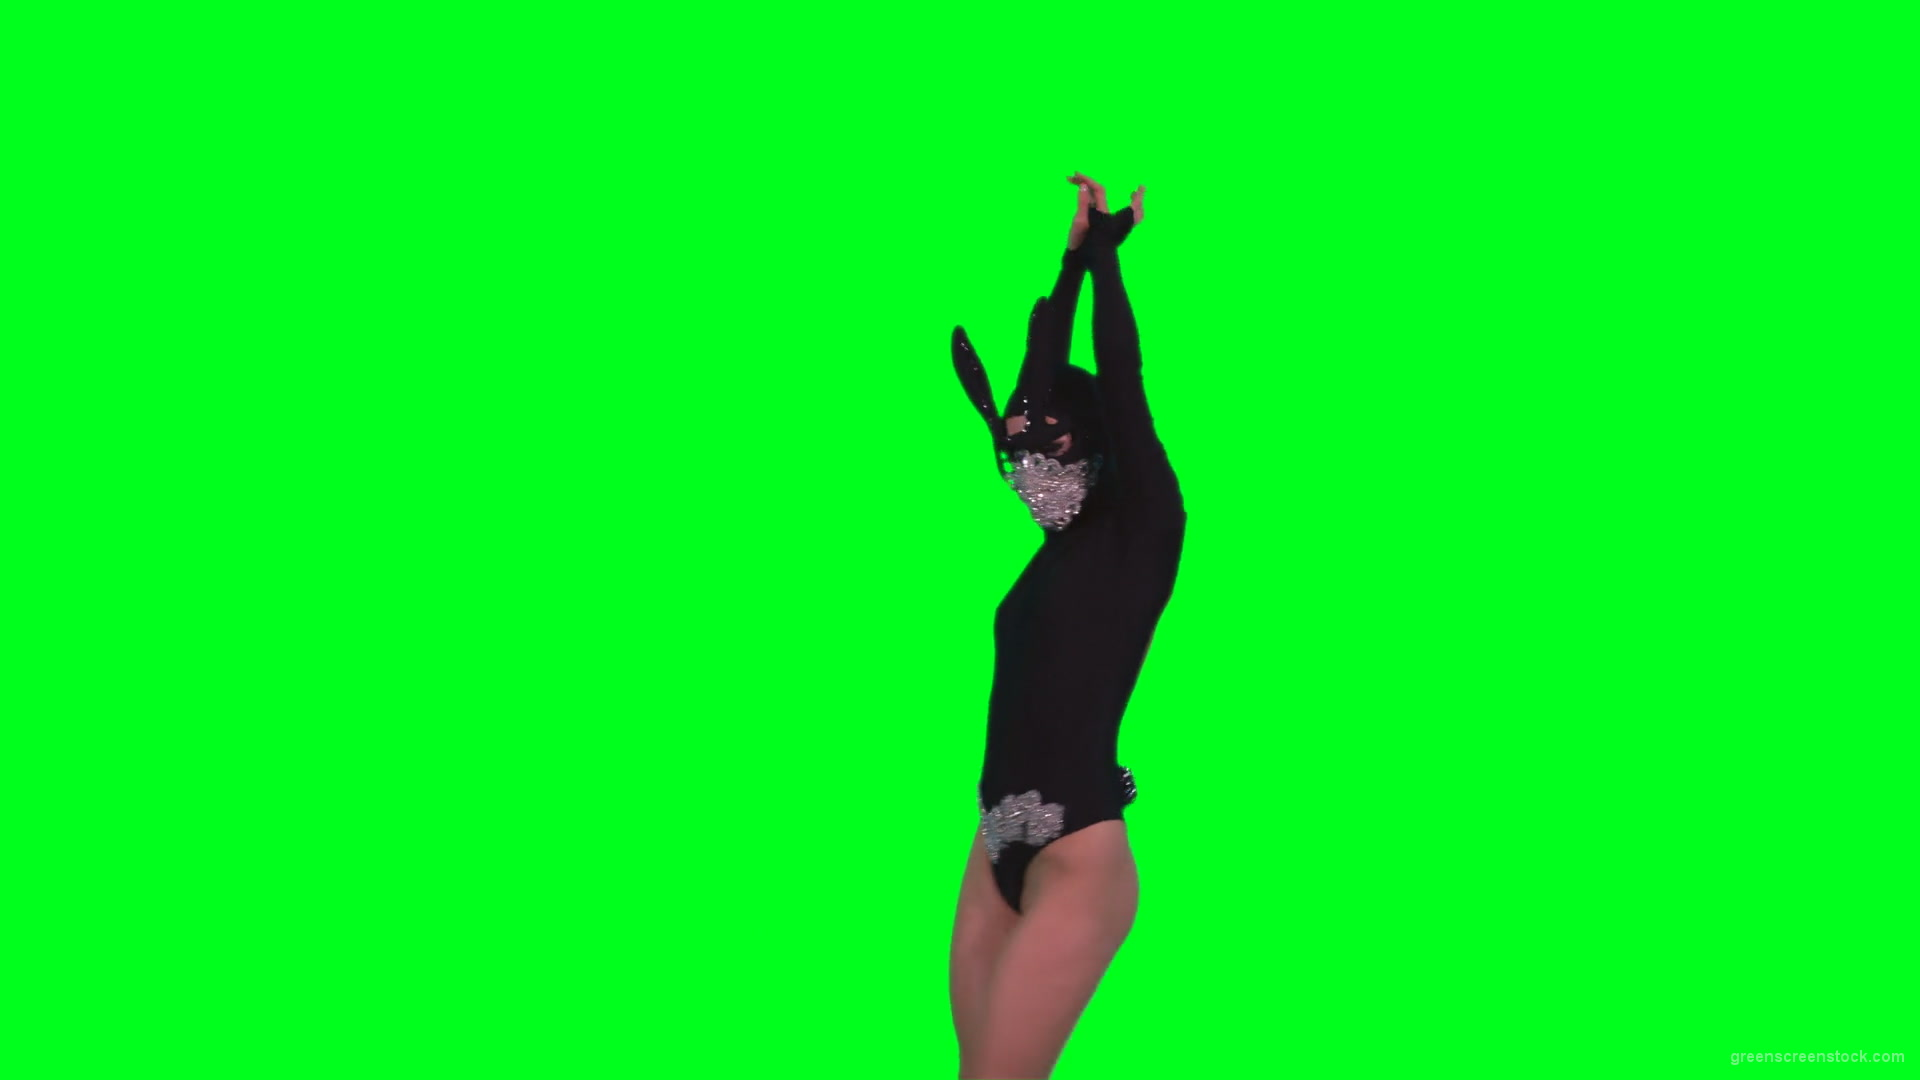 Sexy-bunny-girl-dance-performs-in-rabbit-costume-on-green-screen-4K-Video-Footage-1920_005 Green Screen Stock